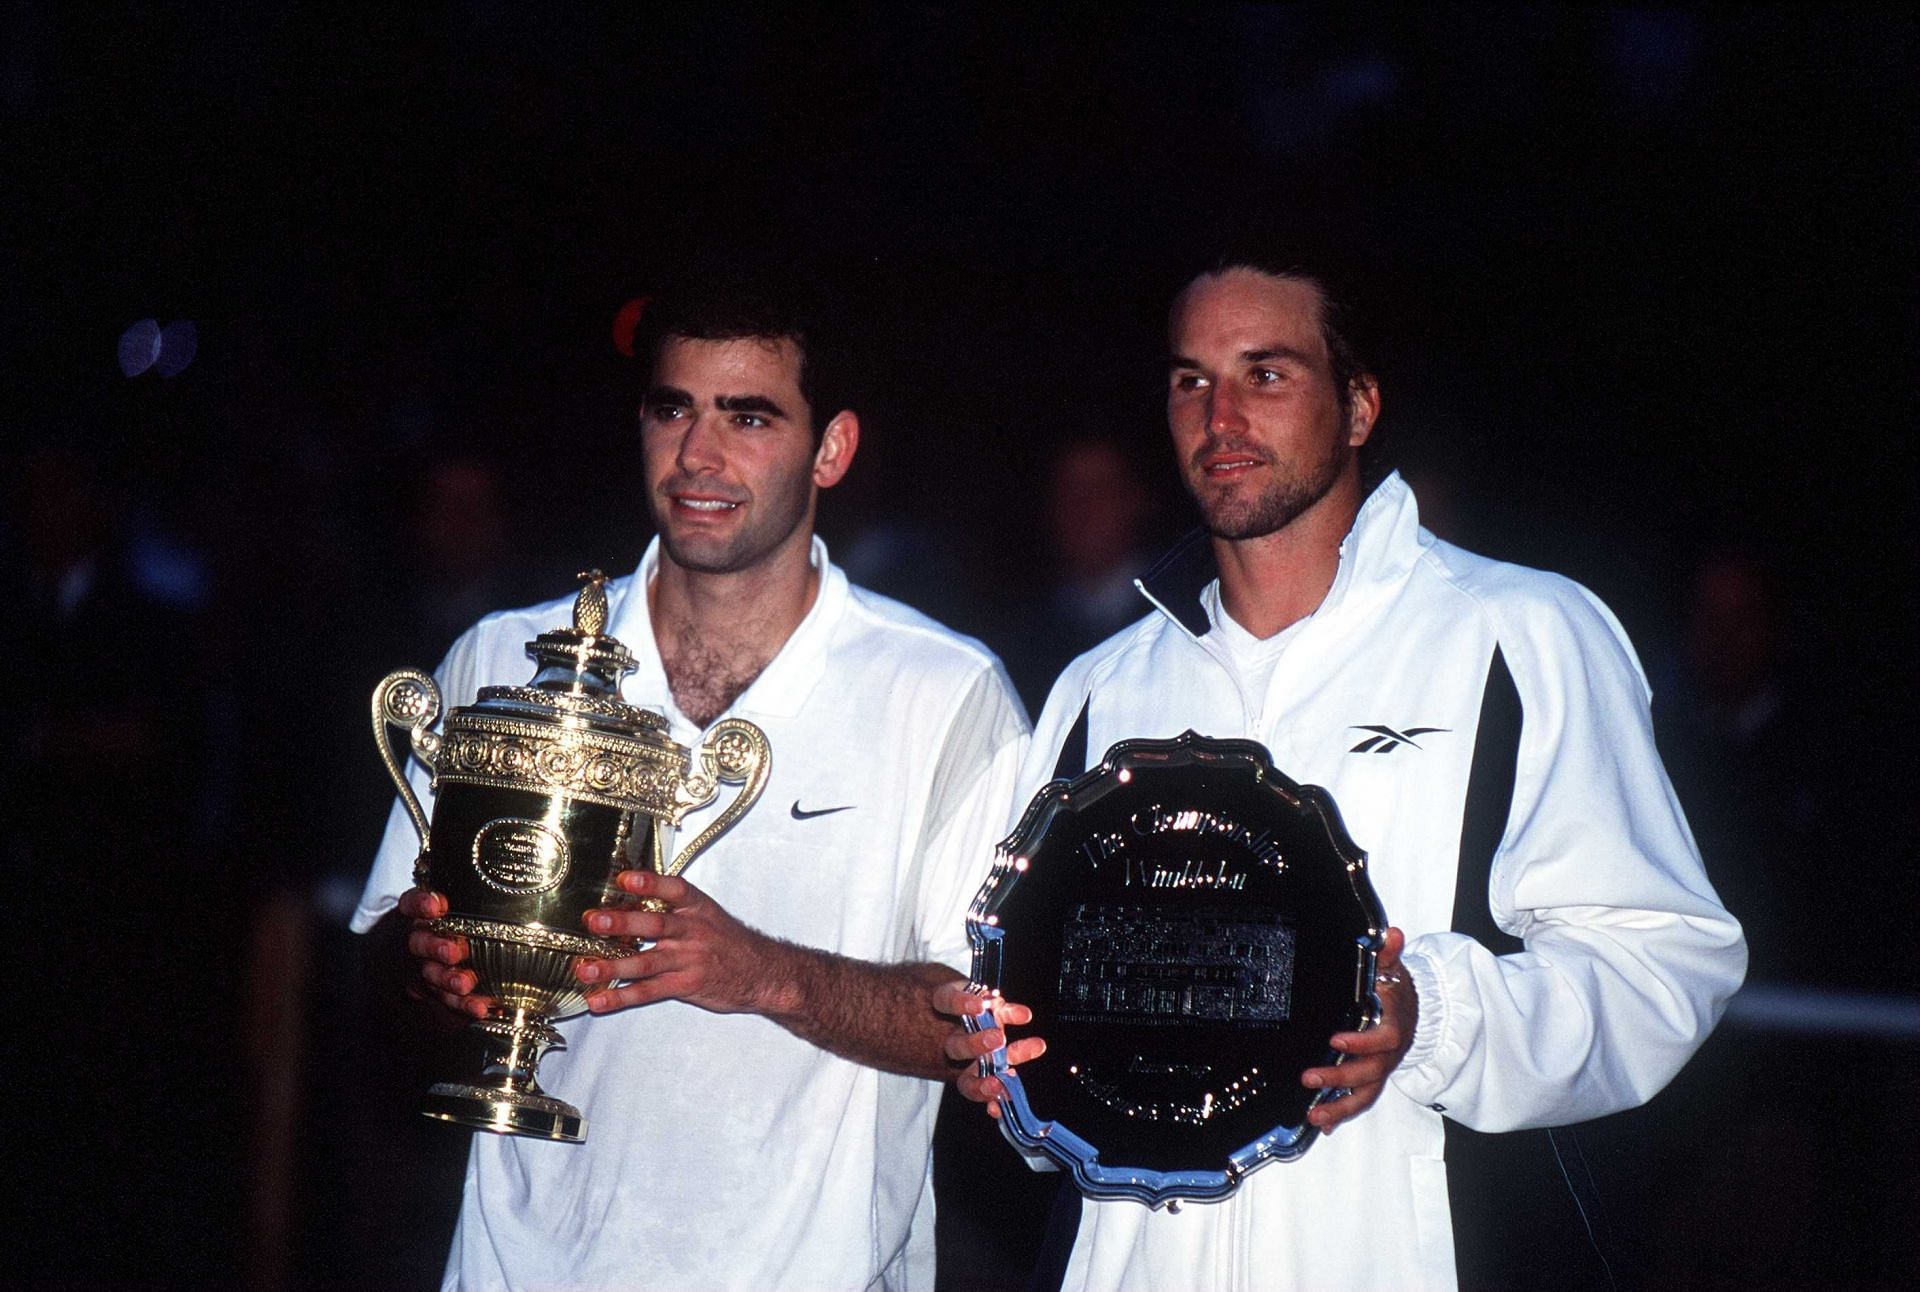 Pete Sampras (left) triumphed for the seventh time at the grasscourt major in 2000.